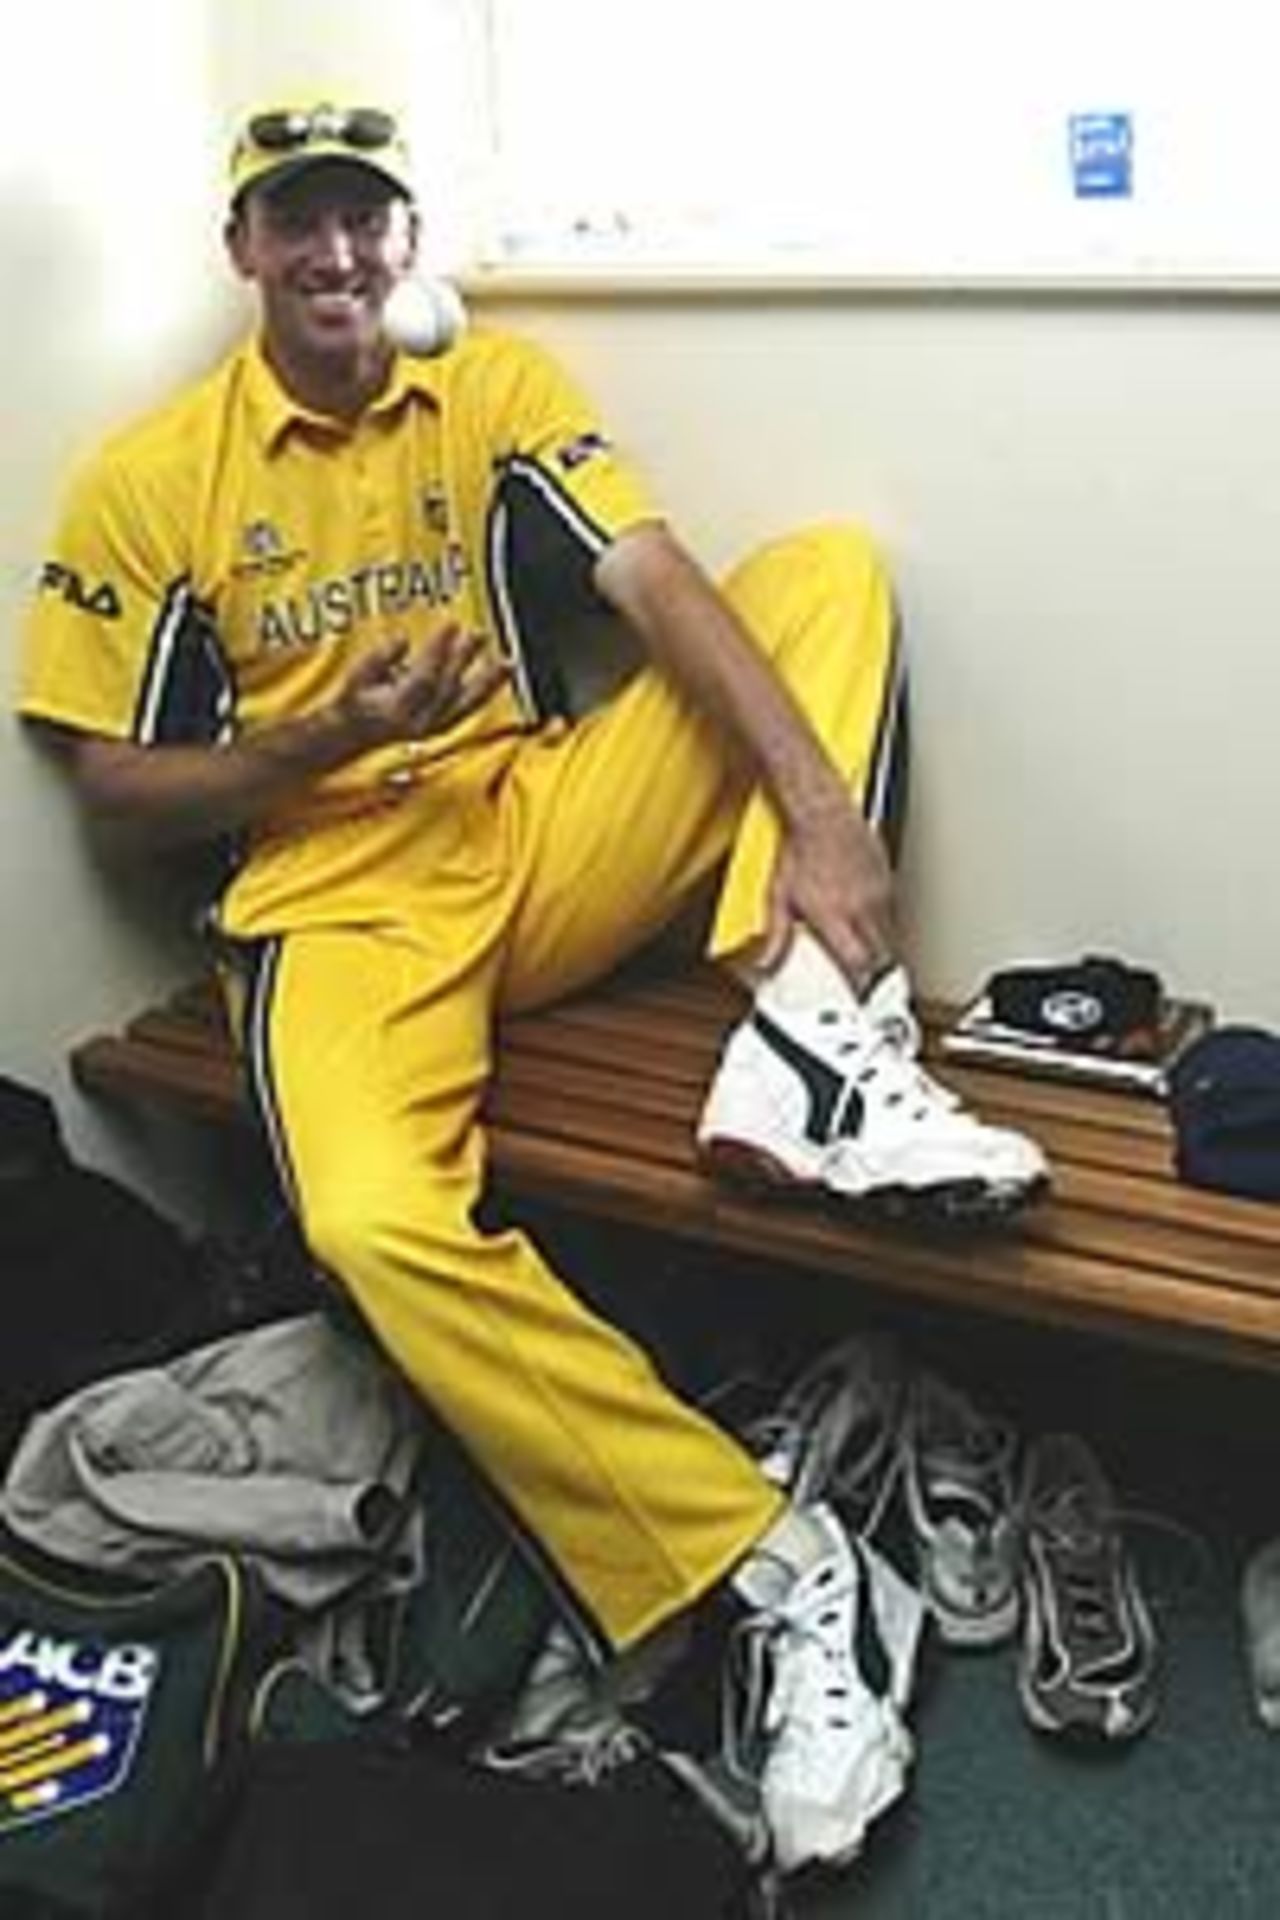 POTCHEFSTROOM - FEBRUARY 27: Glenn McGrath of Australia reflects on his 7/15 bowling performance after the World Cup One Day International between Australia and Namibia played at North West Cricket Stadium, Potchefstroom, South Africa, on February 27, 2003.